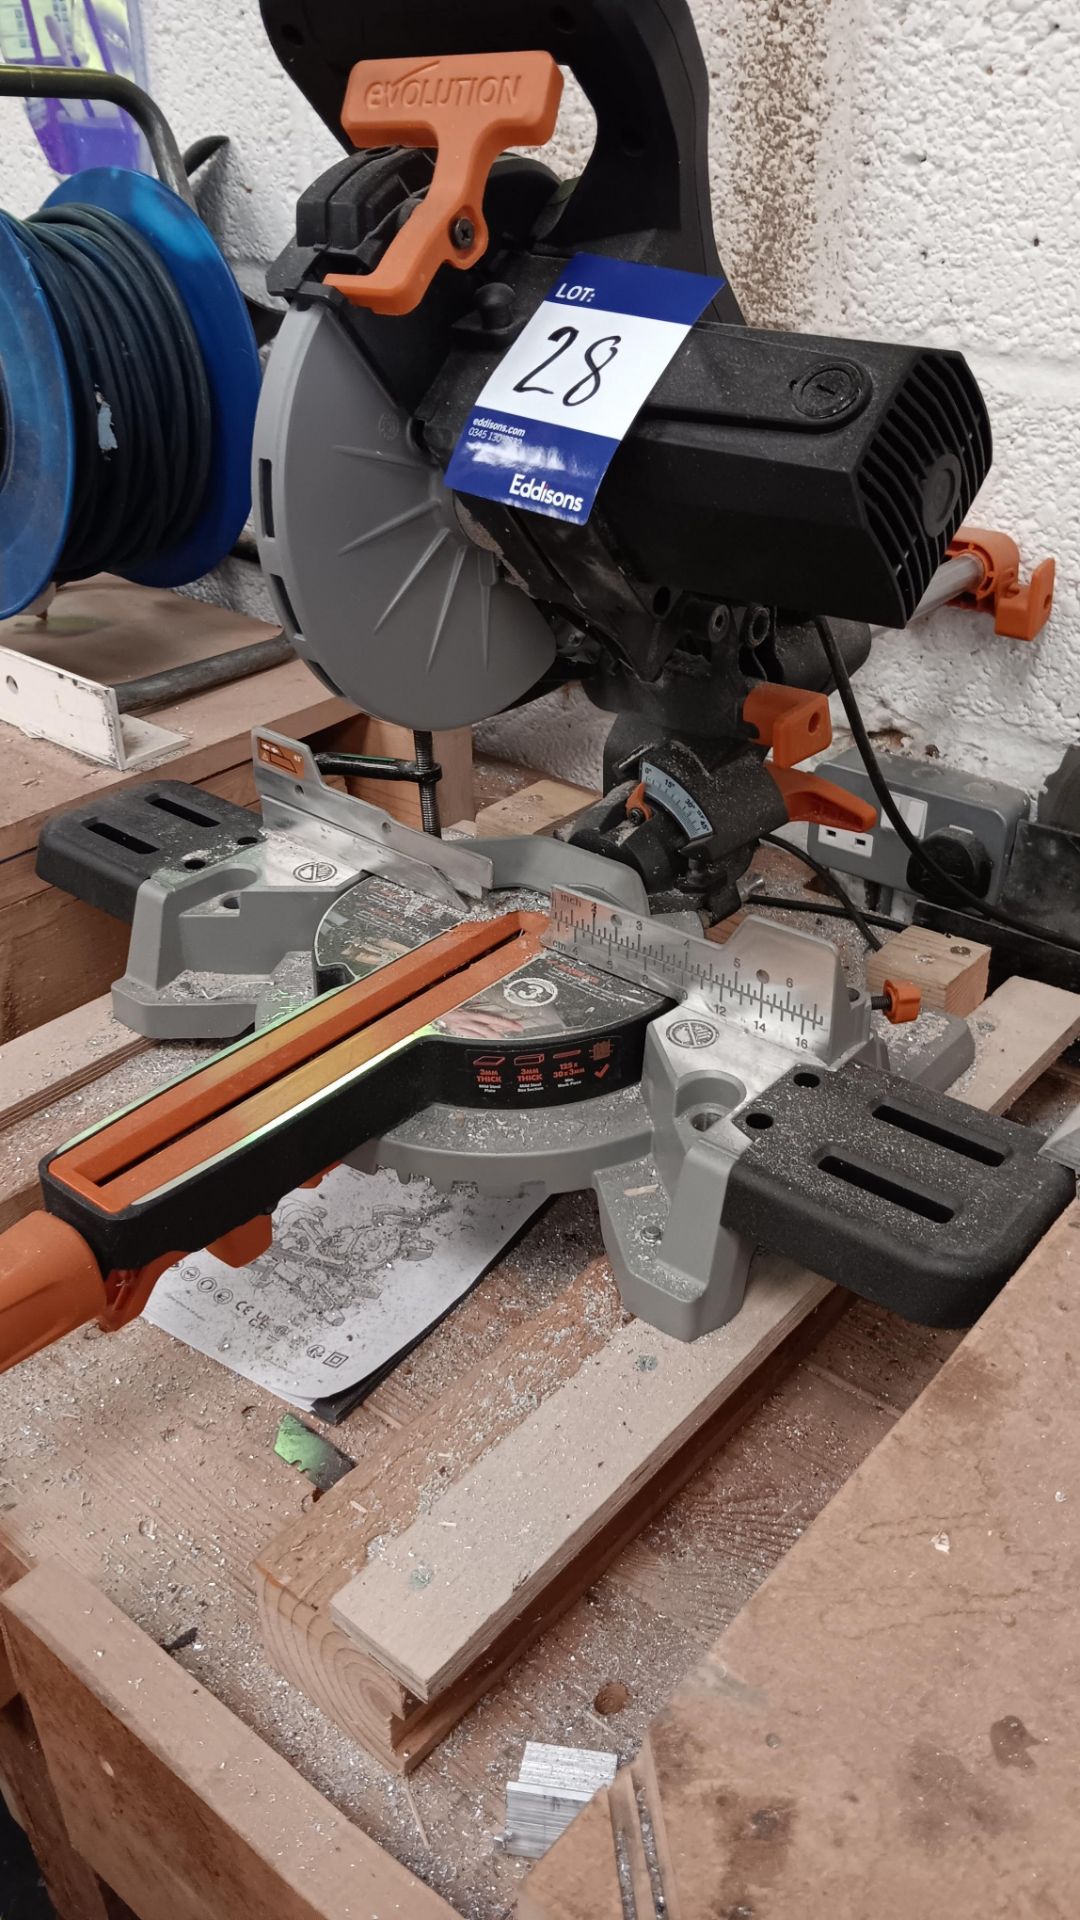 Evolution Power R185 multi-material 185mm TCT sliding mitre saw, serial number R185SMS- - Image 2 of 3